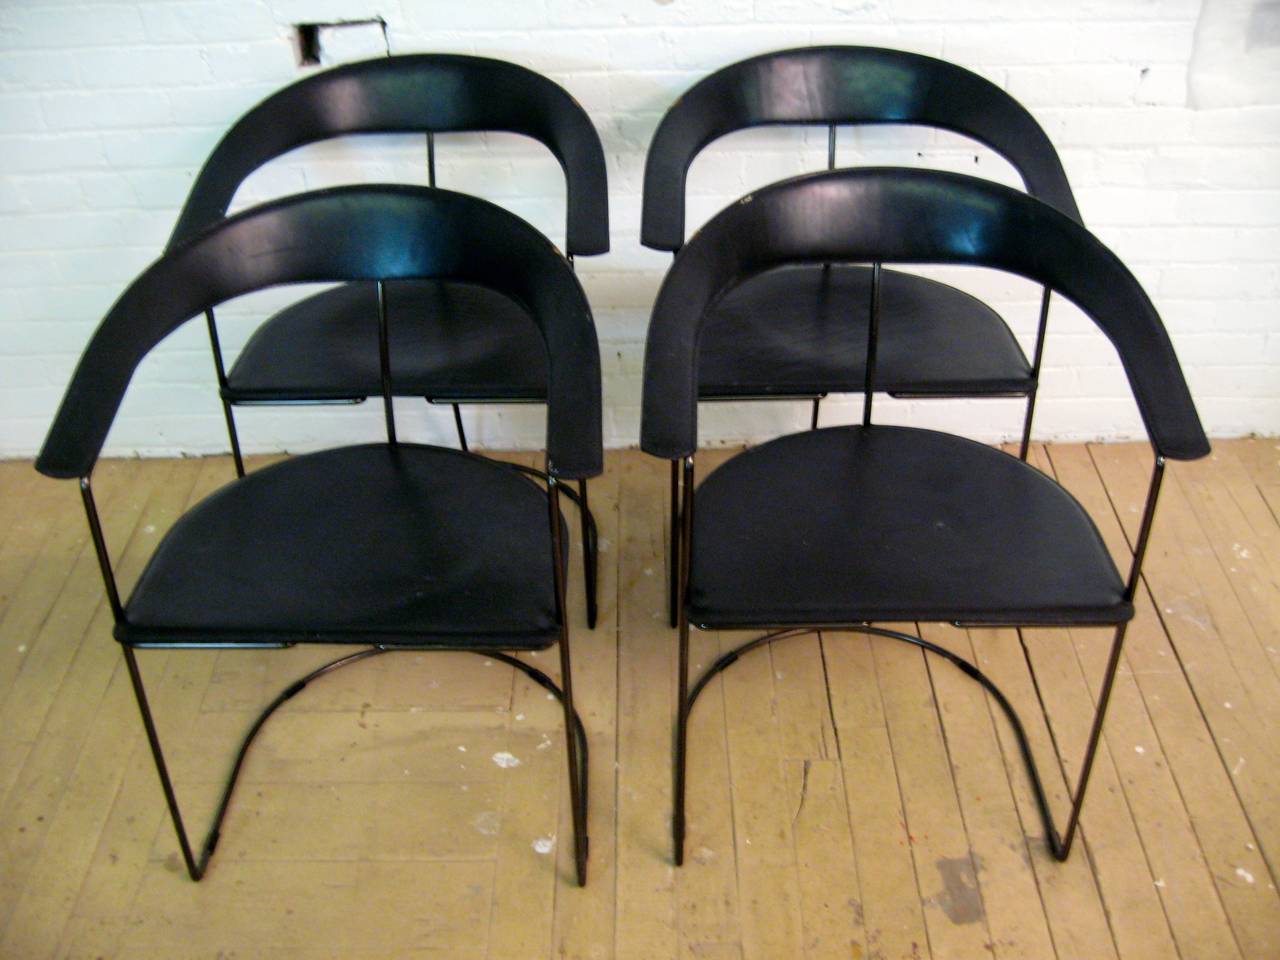 Set of four Arrben Italy hard leather dining armchairs.  Circa 1980.  Black enameled steel and leather cantilever construction with rear support rod.  Excellent, heavy duty tanned and stitched black leather seats and backs.  Embossed signature under